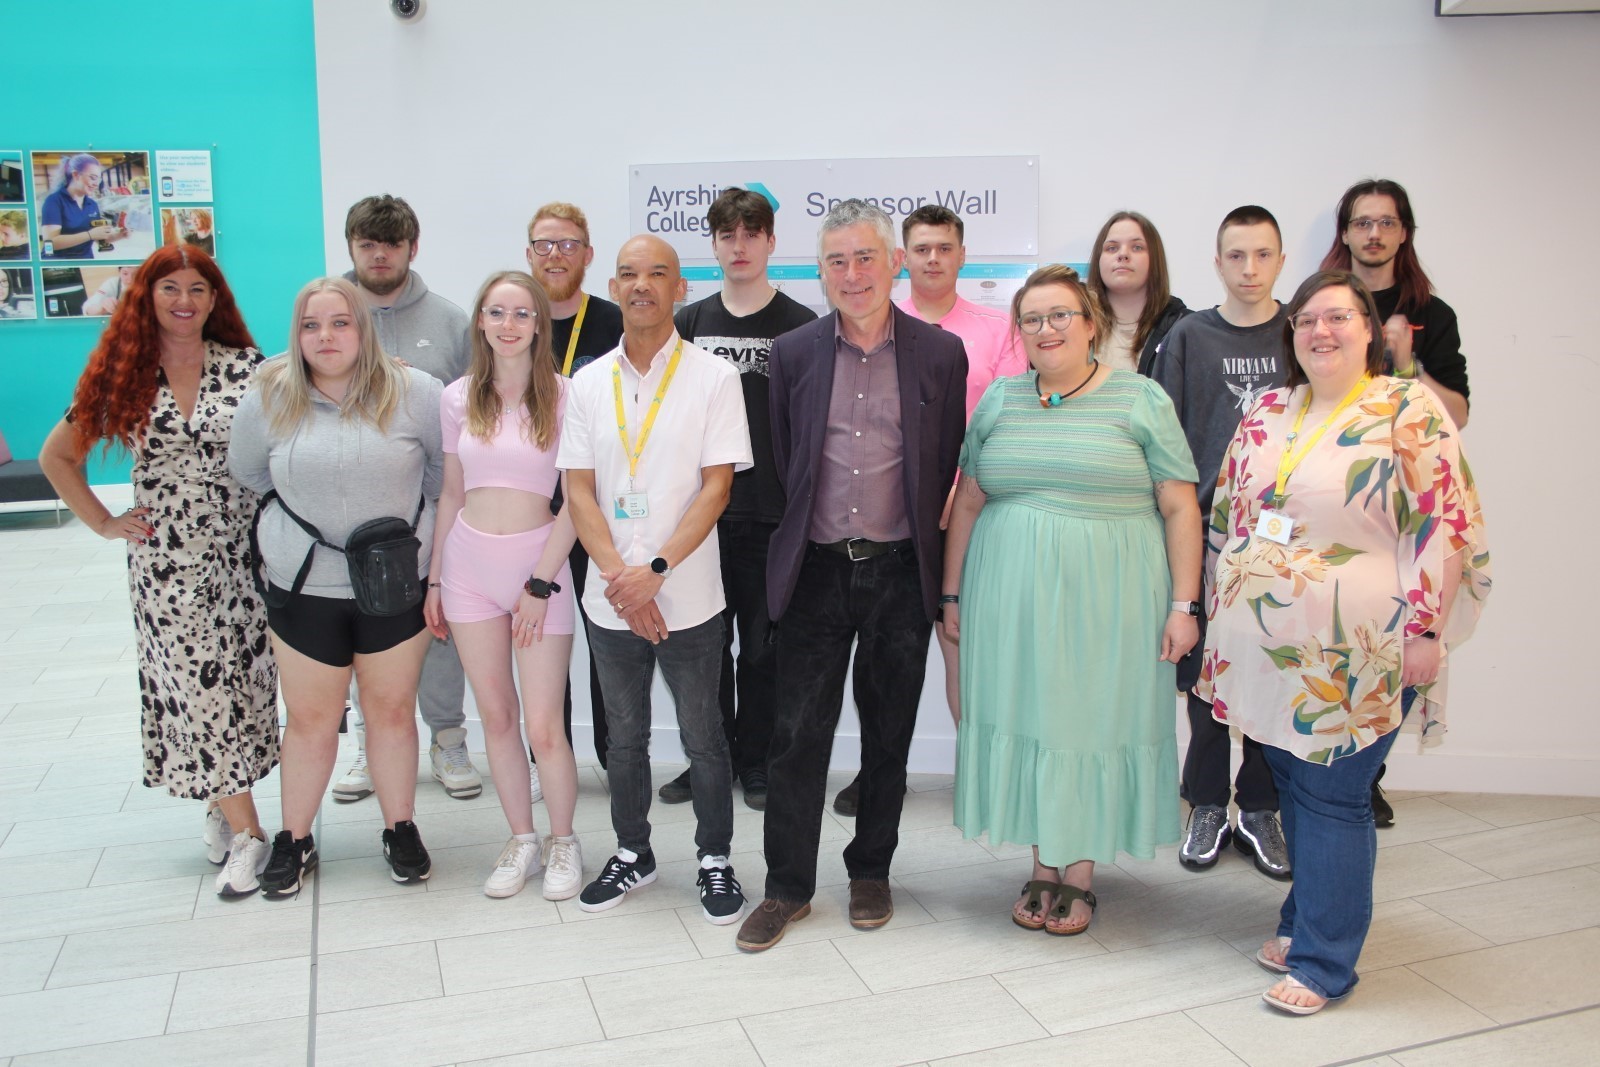 MP visits college to see HIVE students thrive